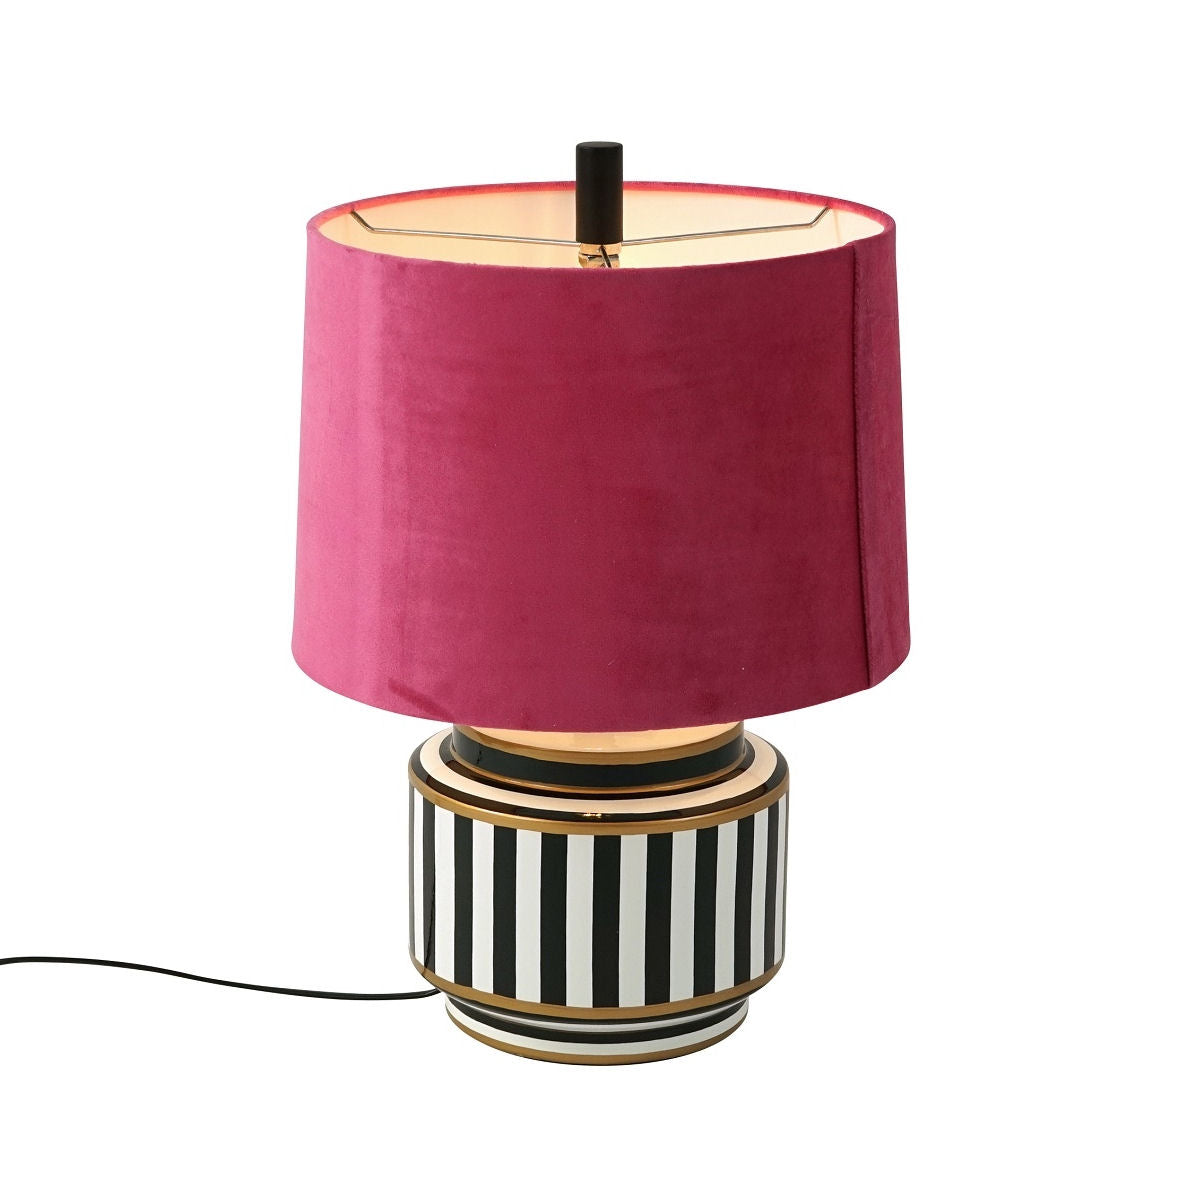 Tiffany Table Lamp Black and White with Pink Shade